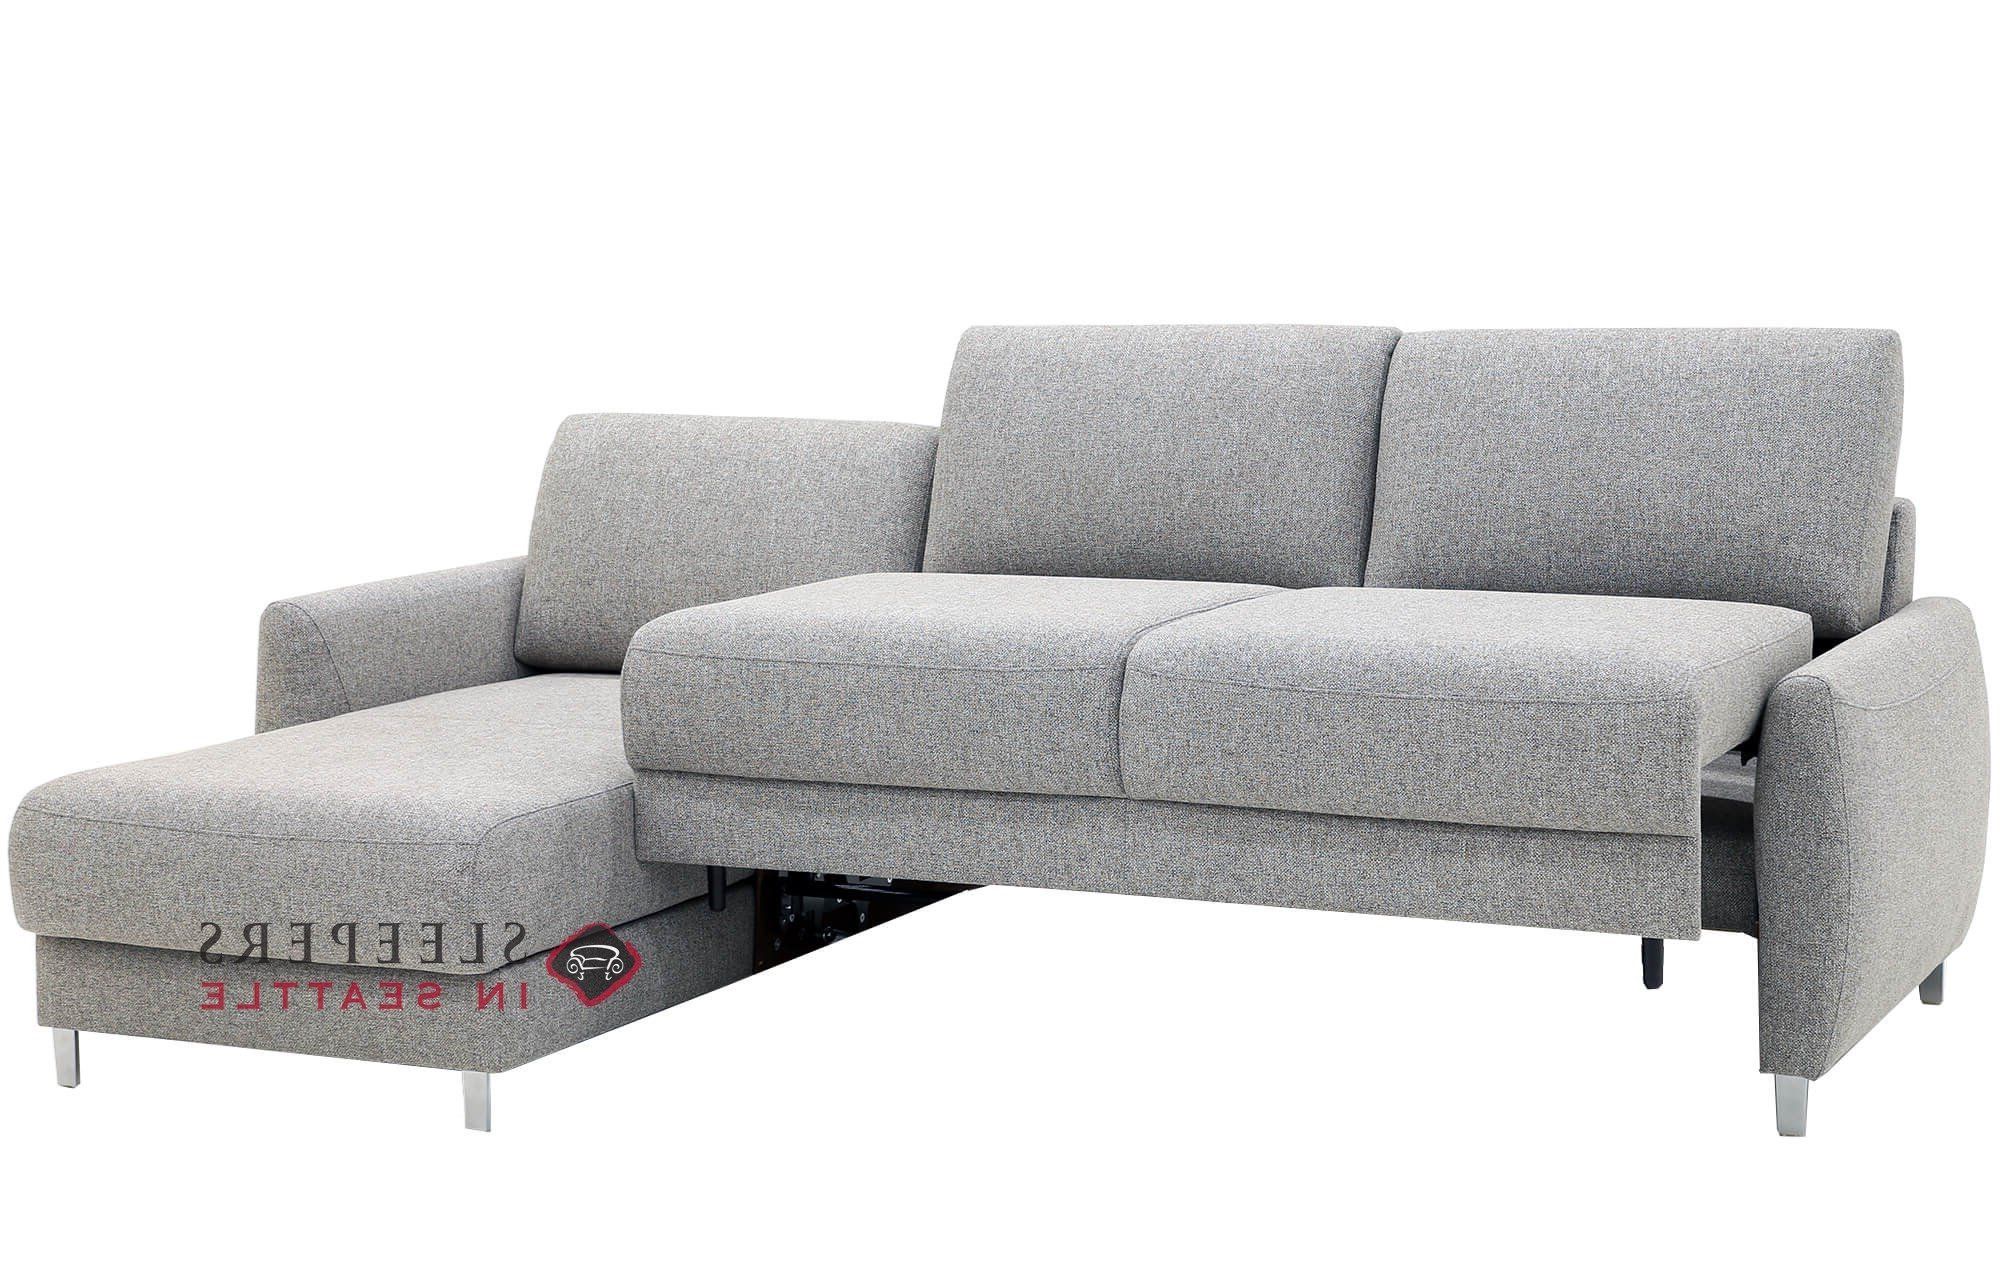 Customize And Personalize Delta Chaise Sectional Fabric Sofaluonto |  Chaise Sectional Size Sofa Bed | Sleepersinseattle Regarding Convertible Sofa With Matching Chaise (Gallery 4 of 20)